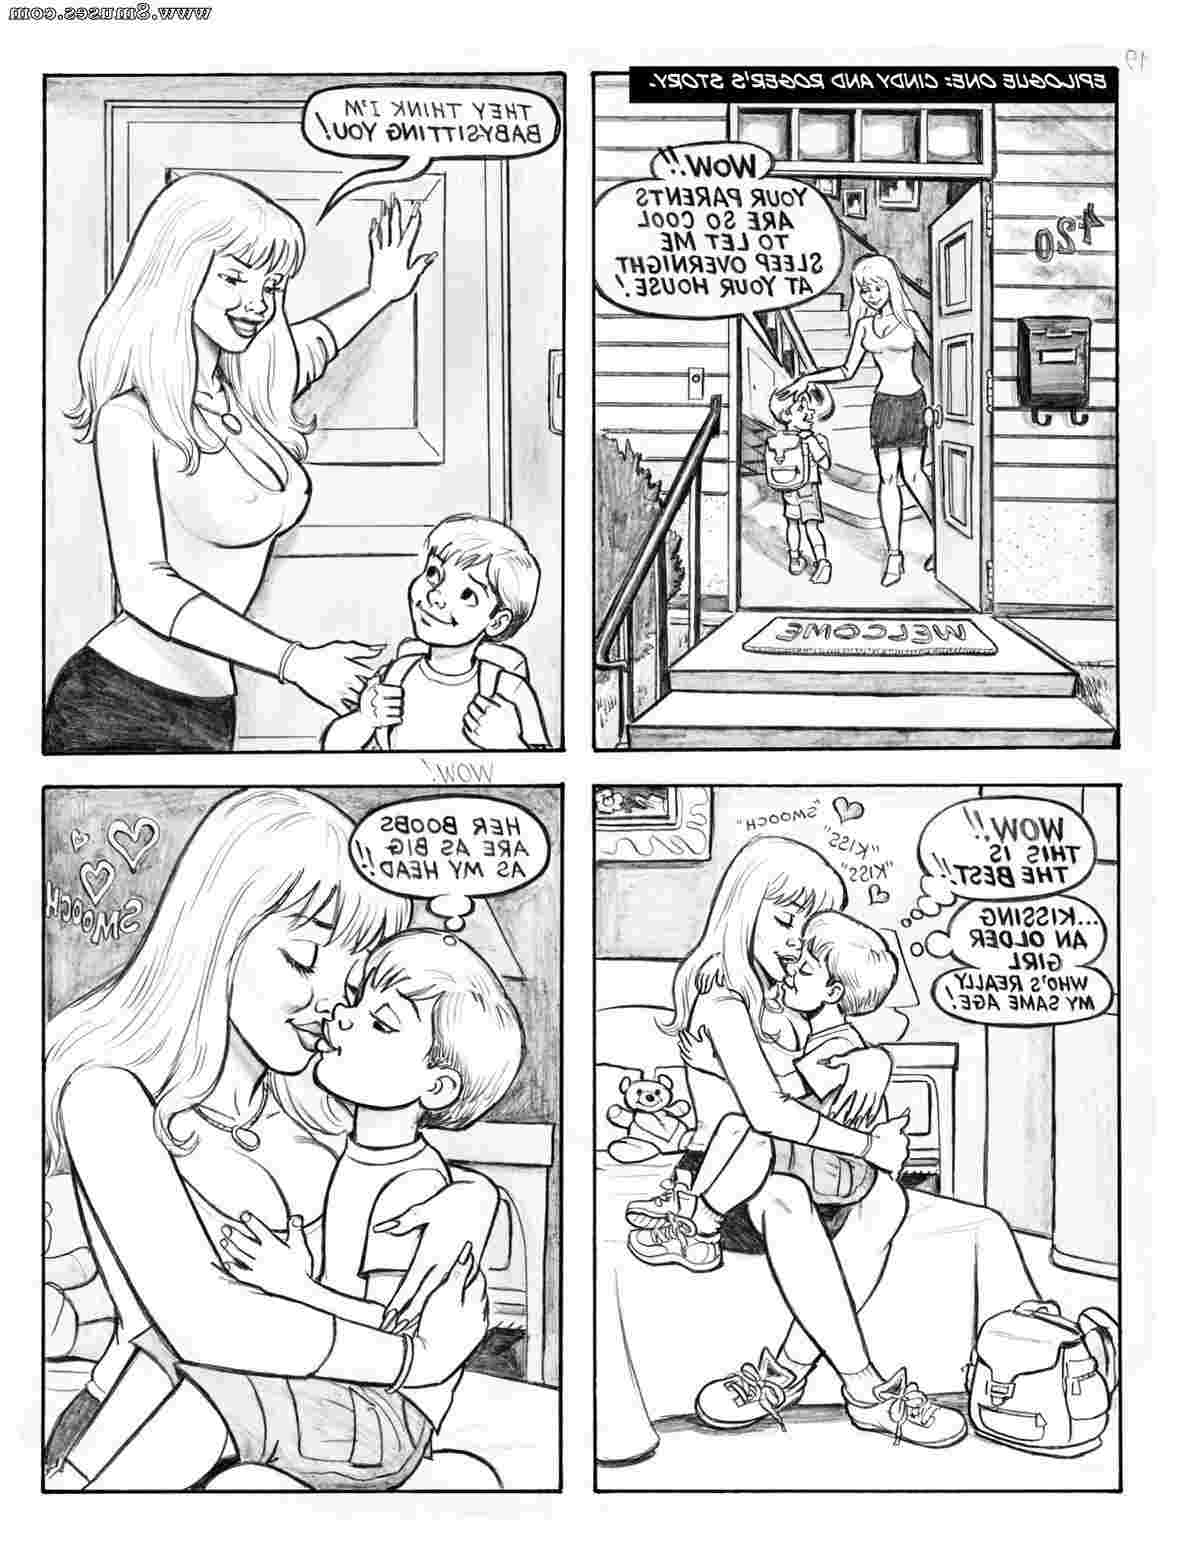 DreamTales-Comics/Something-in-The-Water Something_in_The_Water__8muses_-_Sex_and_Porn_Comics_23.jpg